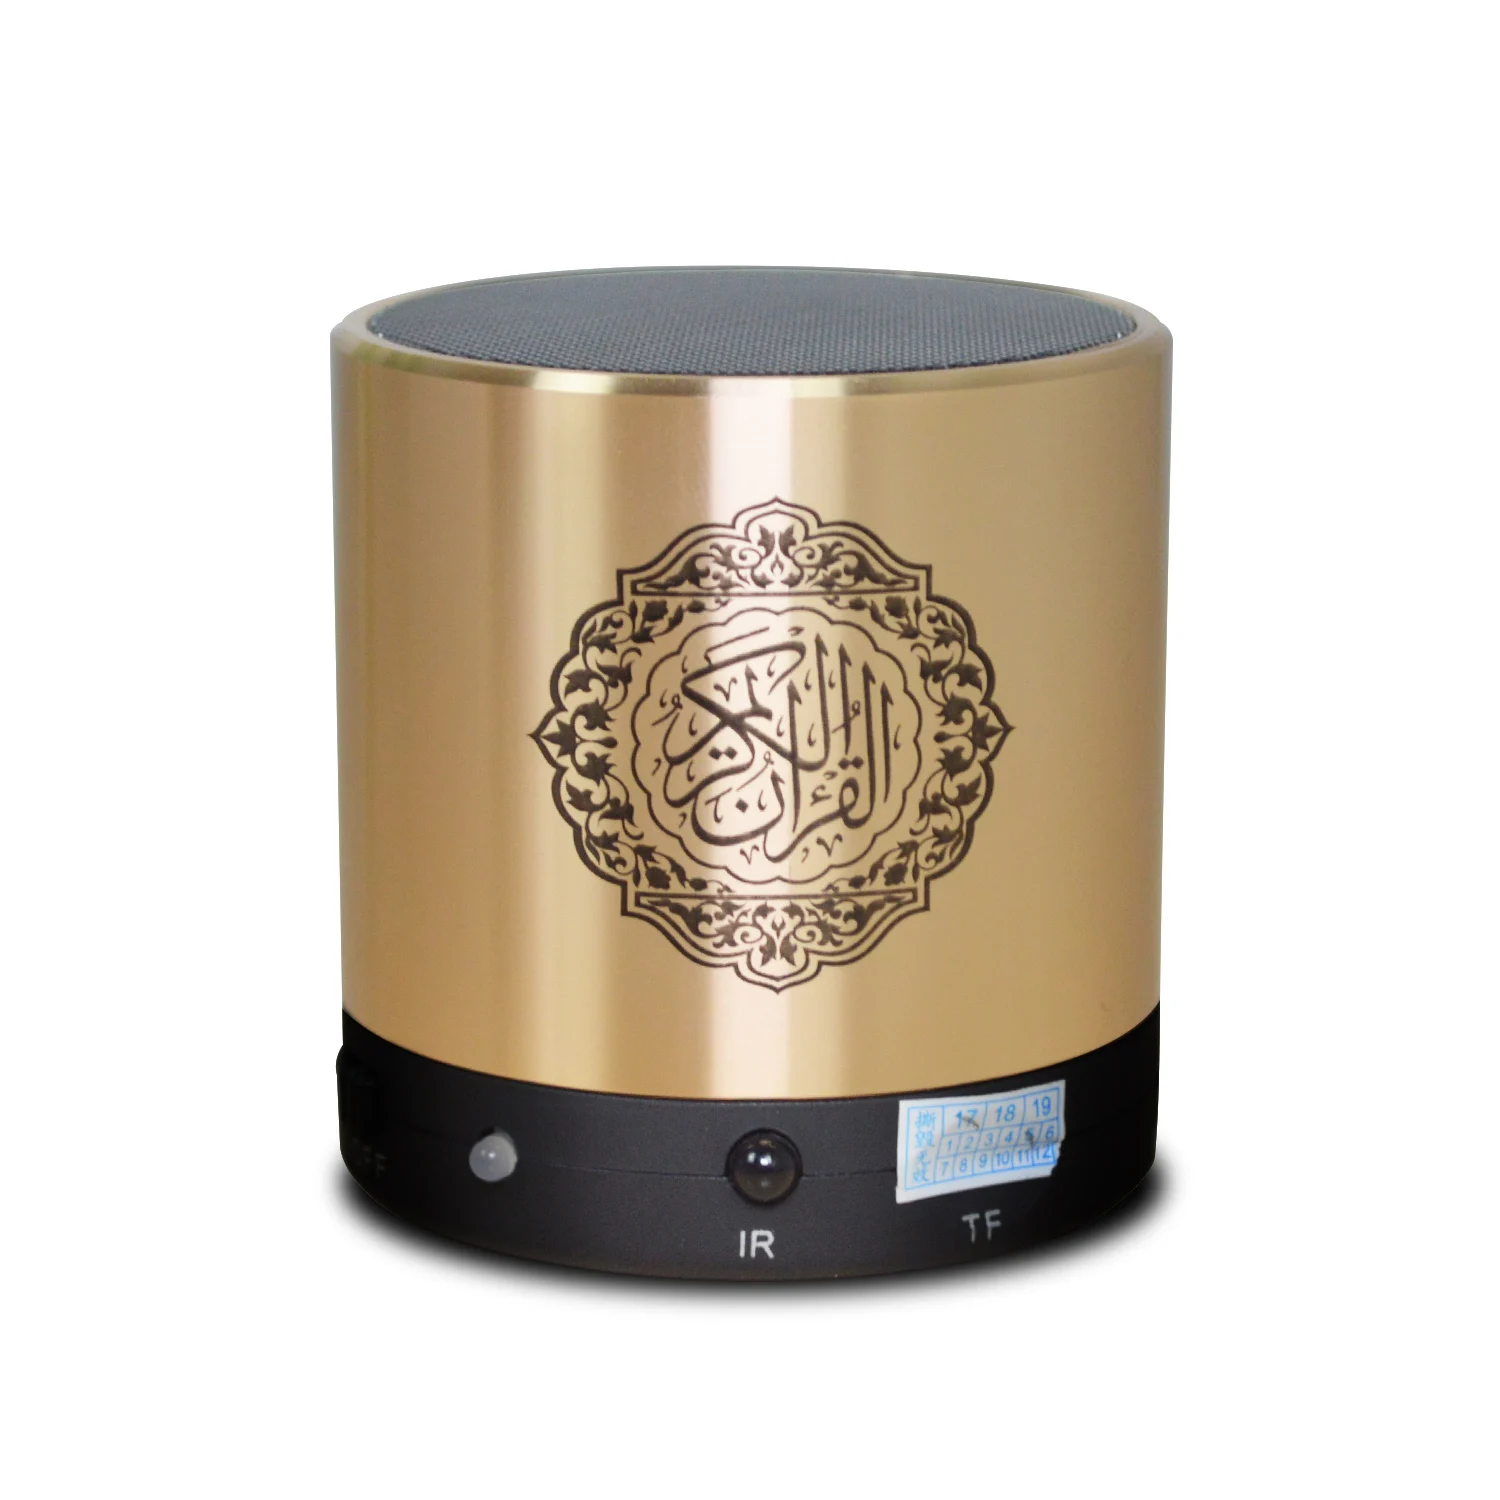 

Digital 8GB holy islamic musical audio gift al mp3 player with remote mini portable download quran speaker, Red/black/gold/silver